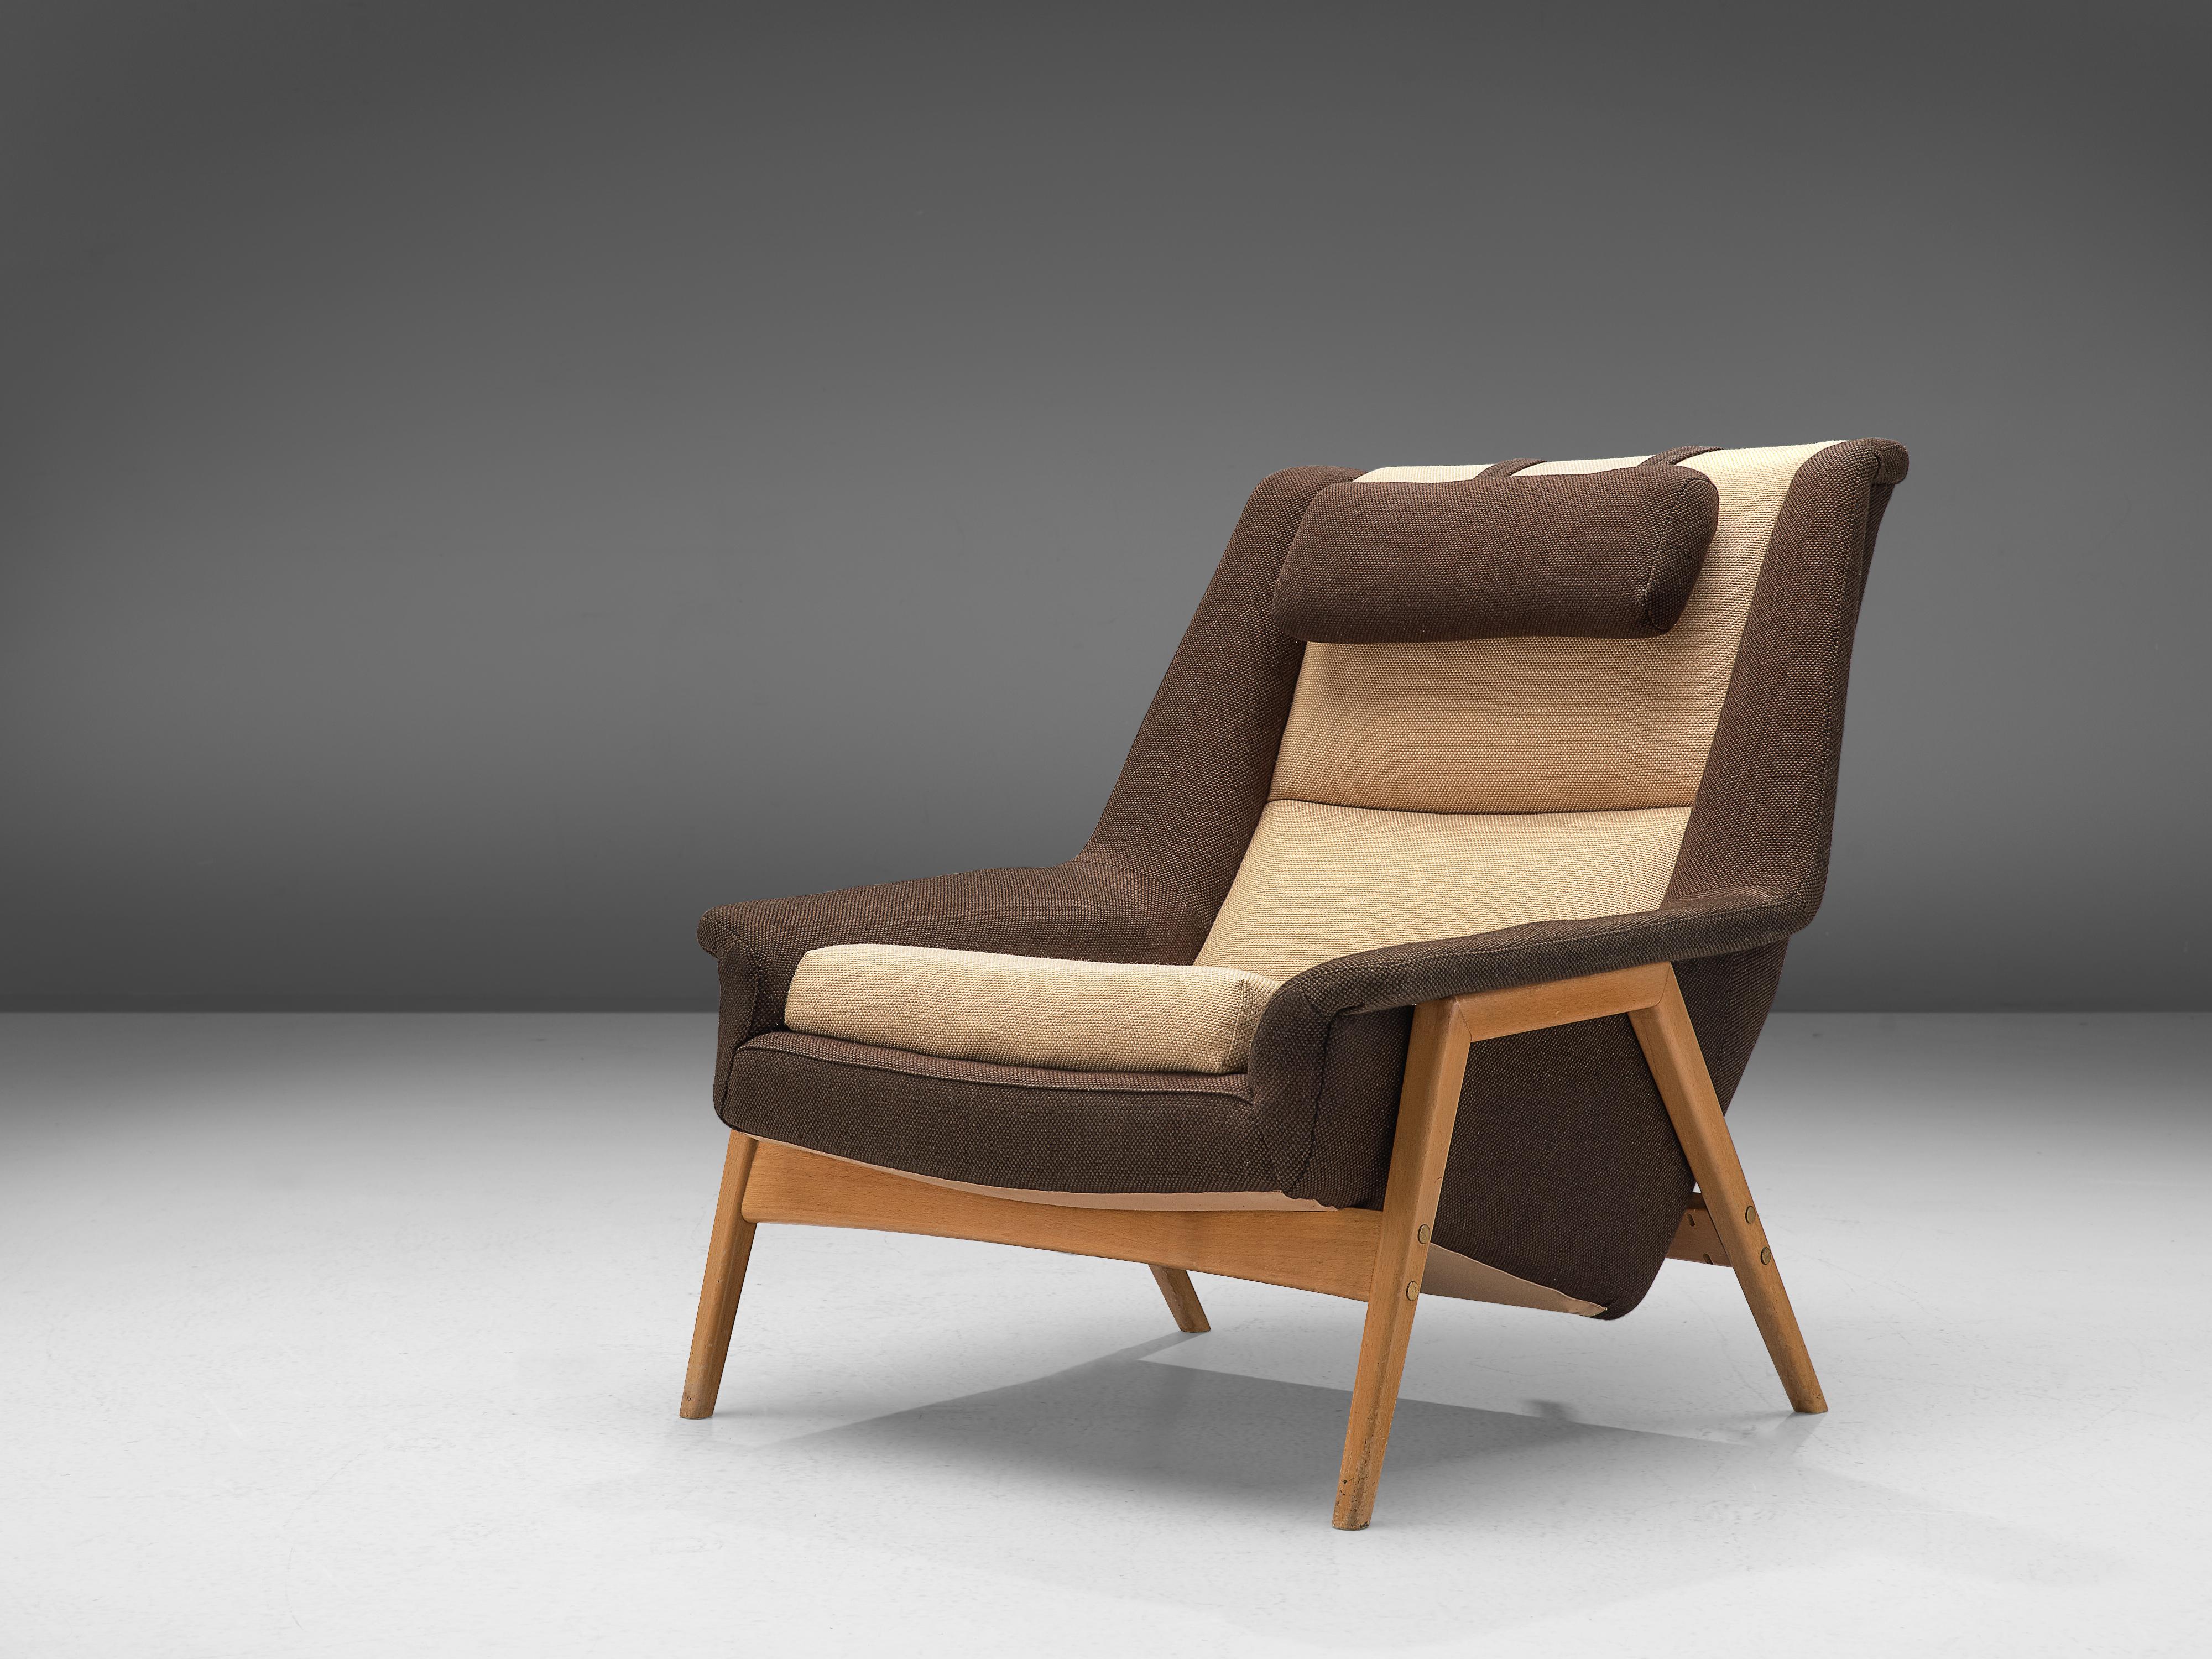 Folke Ohlsson for Fritz Hansen, lounge chair, fabric, wood, Denmark, circa 1960.

This chair by Folke Ohlsson for Fritz Hansen is made to reach an ultimate level of comfort as can clearly be recognized in the design. This Danish chair features